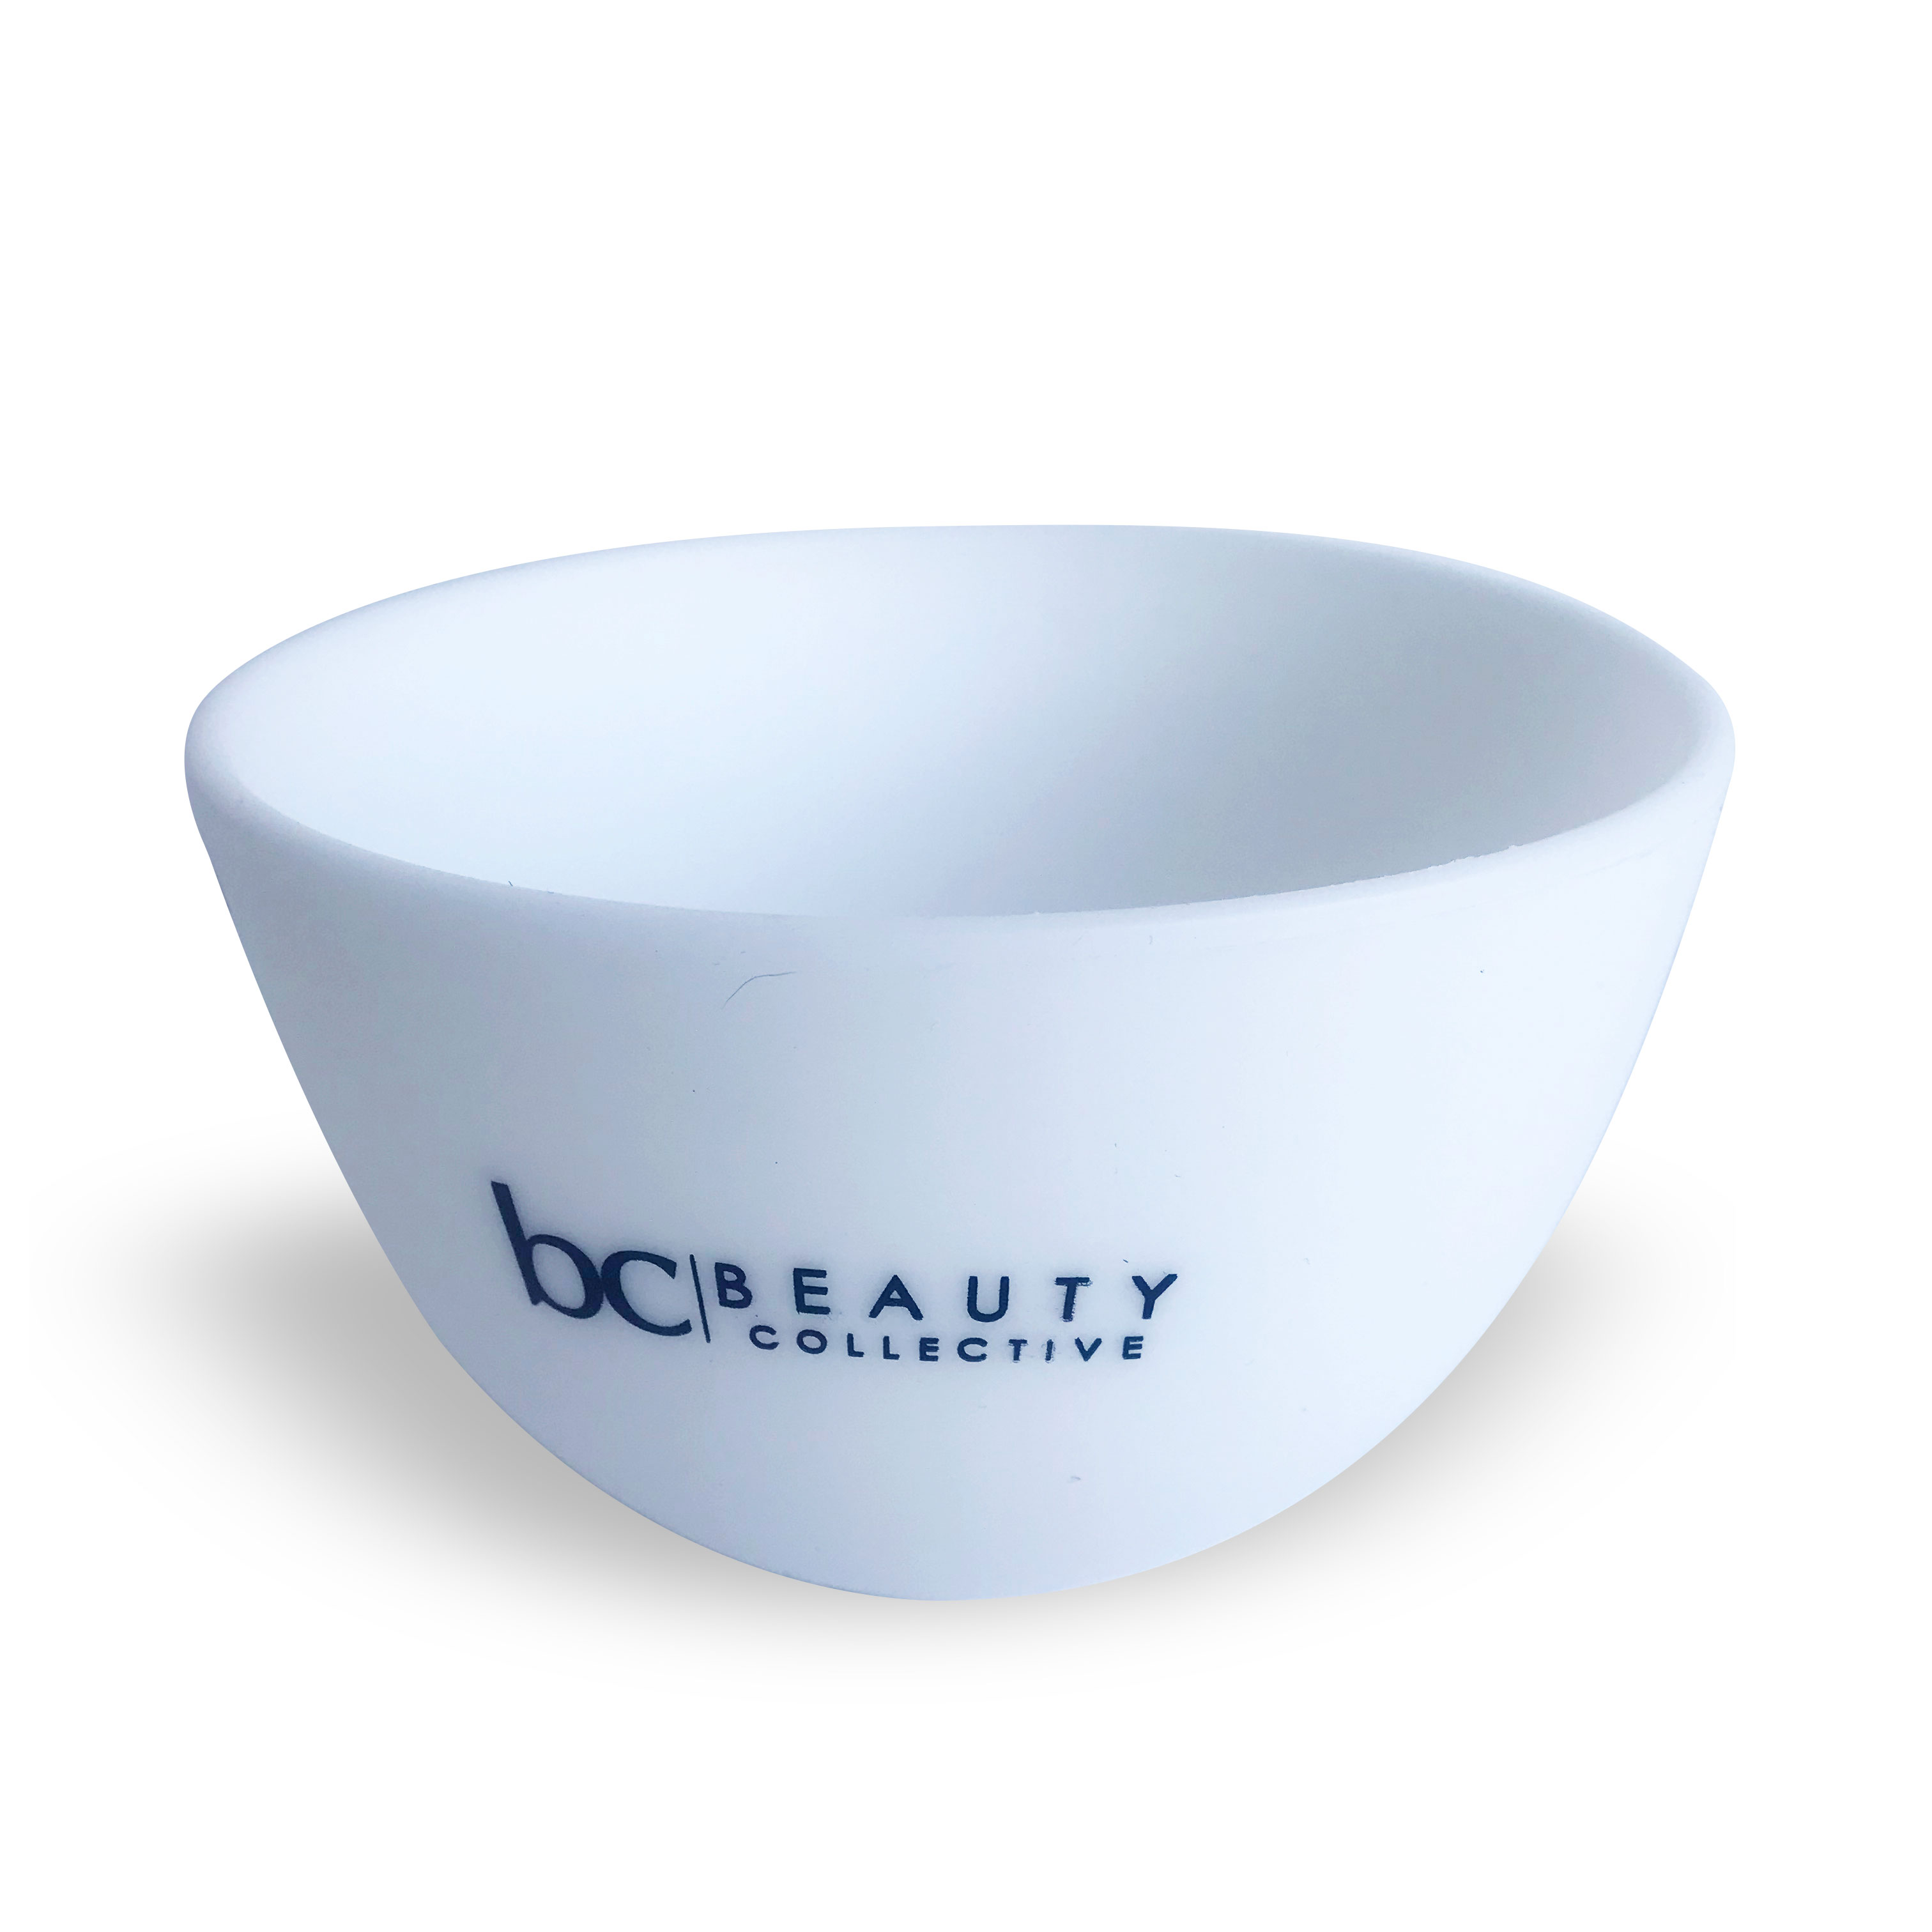 Silicone mixing bowl